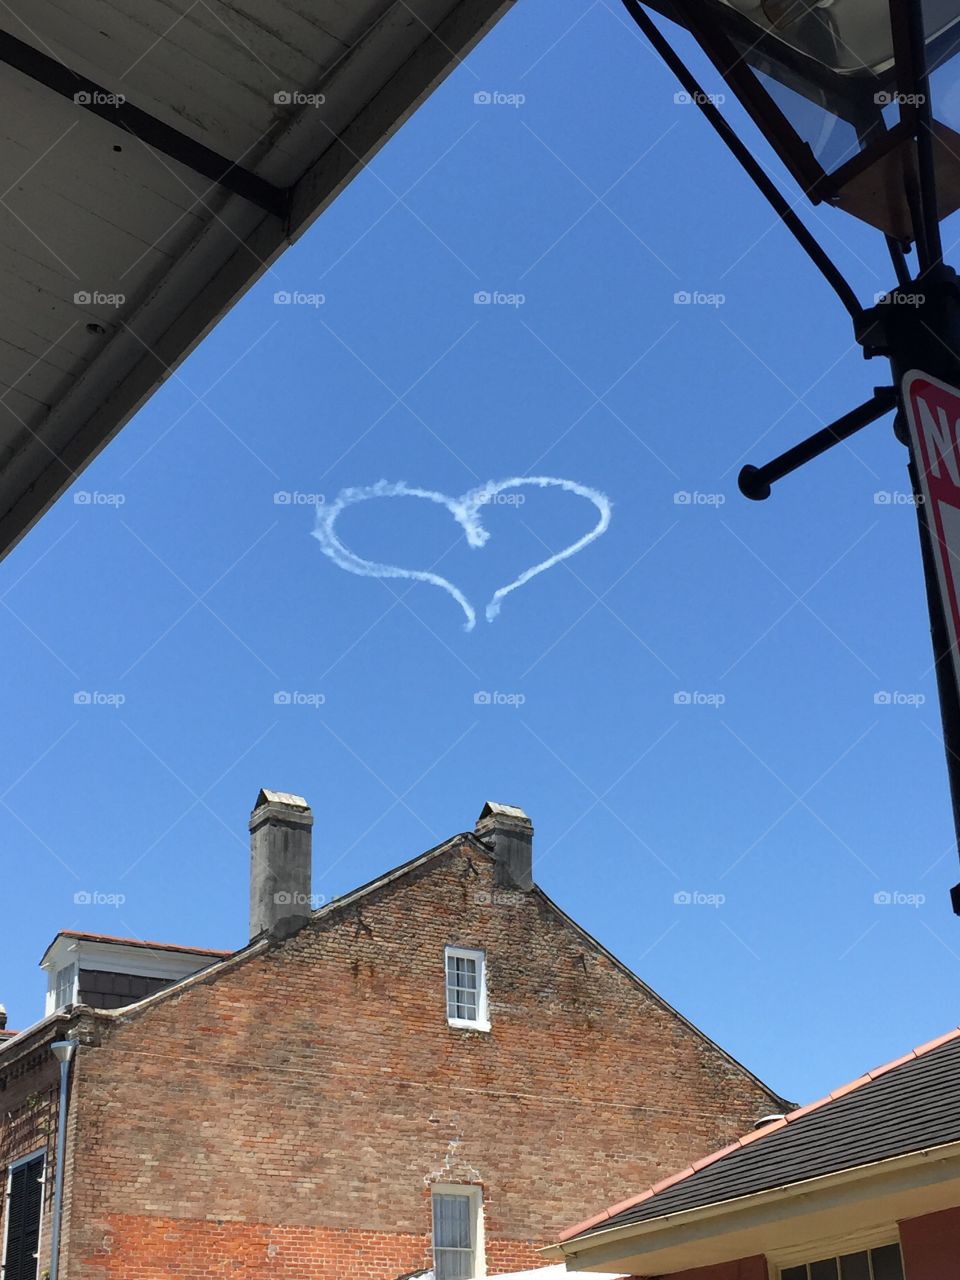 Love is in the Air. Heart in the sky